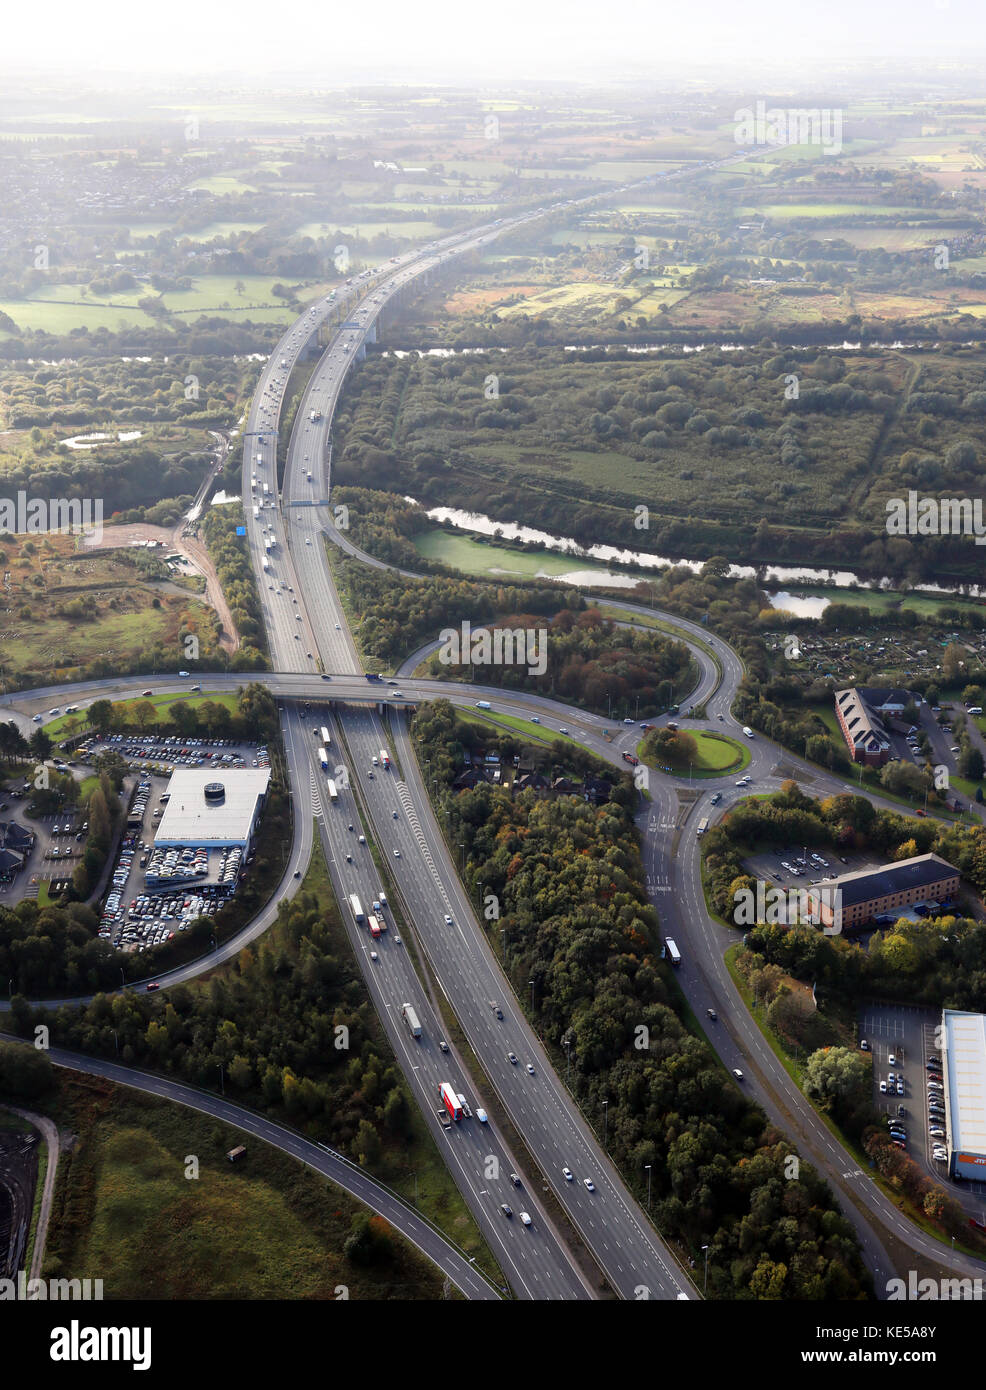 aerial view looking south down the M6 motorway at junction 21, Warrington, UK Stock Photo